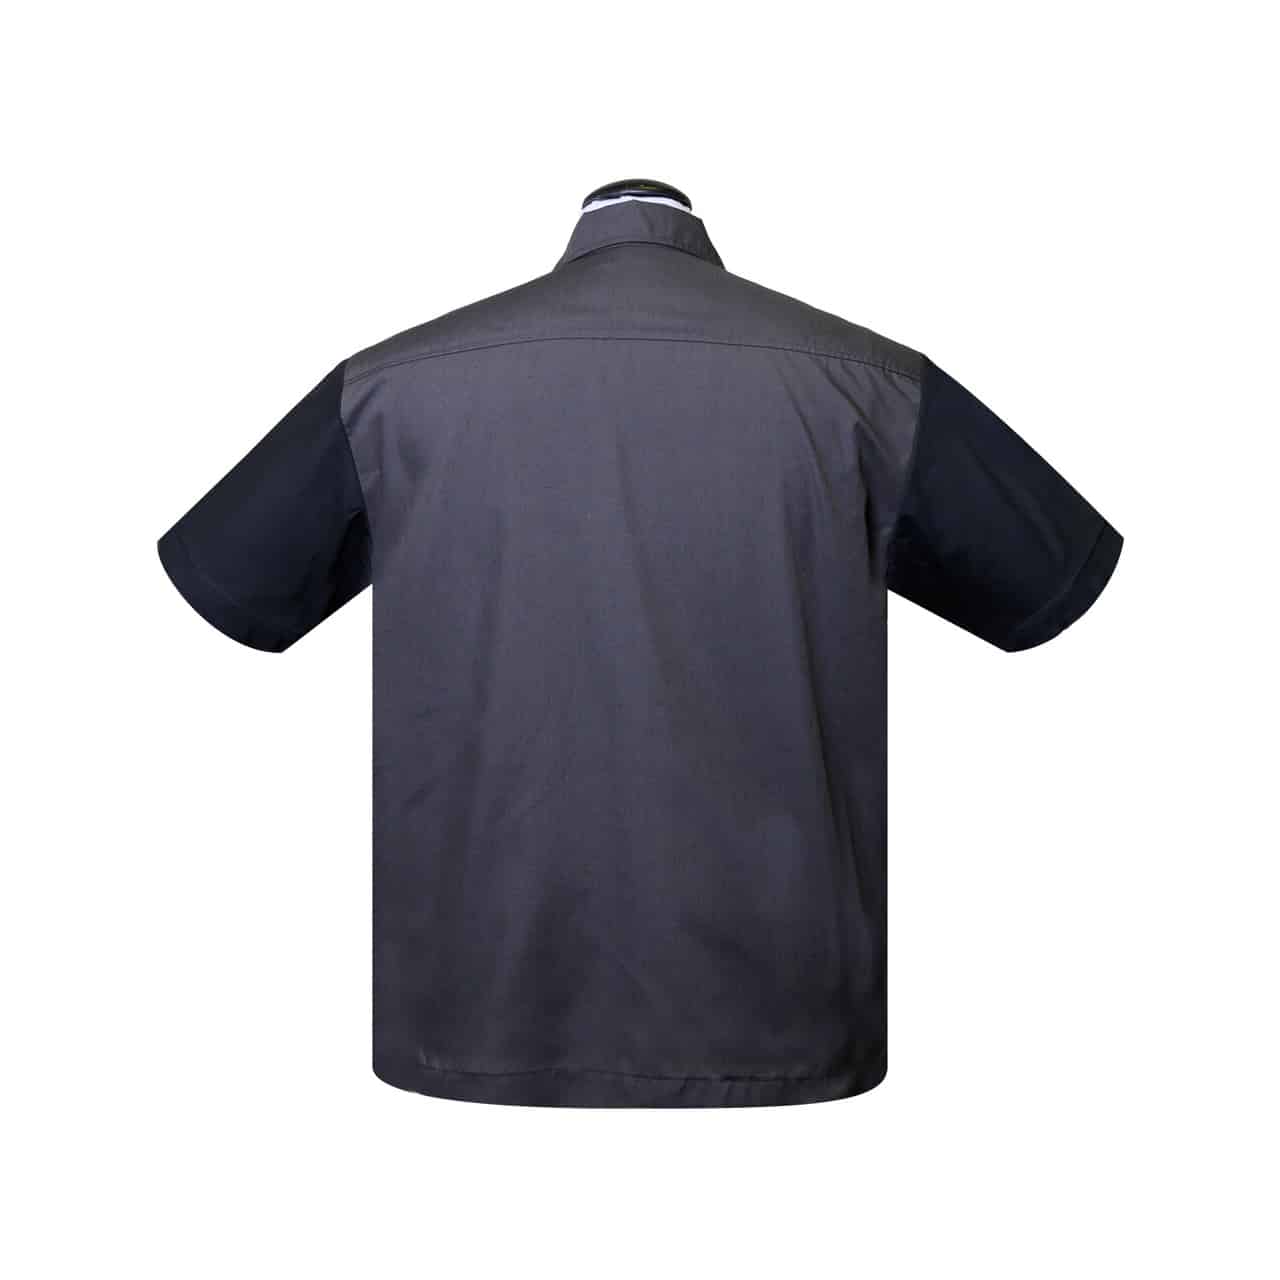 Black and Charcoal Bowling Shirt by Steady Clothing